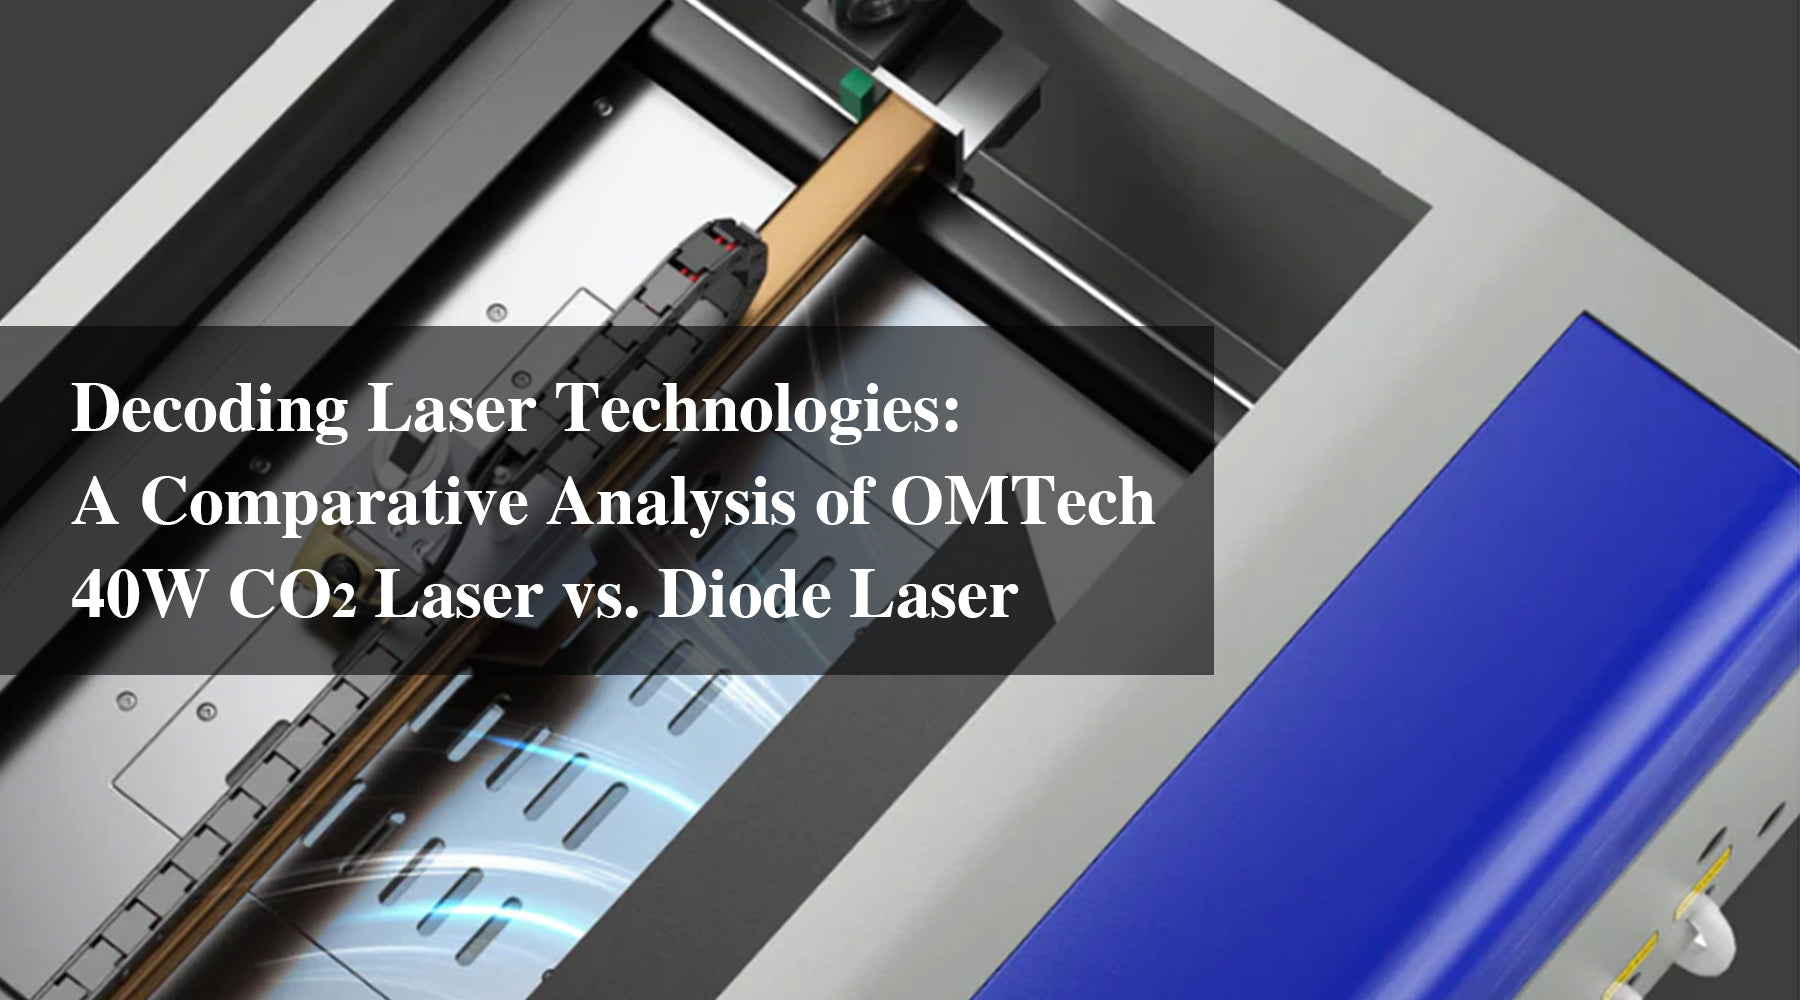 Decoding Laser Technologies: A Comparative Analysis of OMTech 40W CO2 Laser vs. Diode Laser